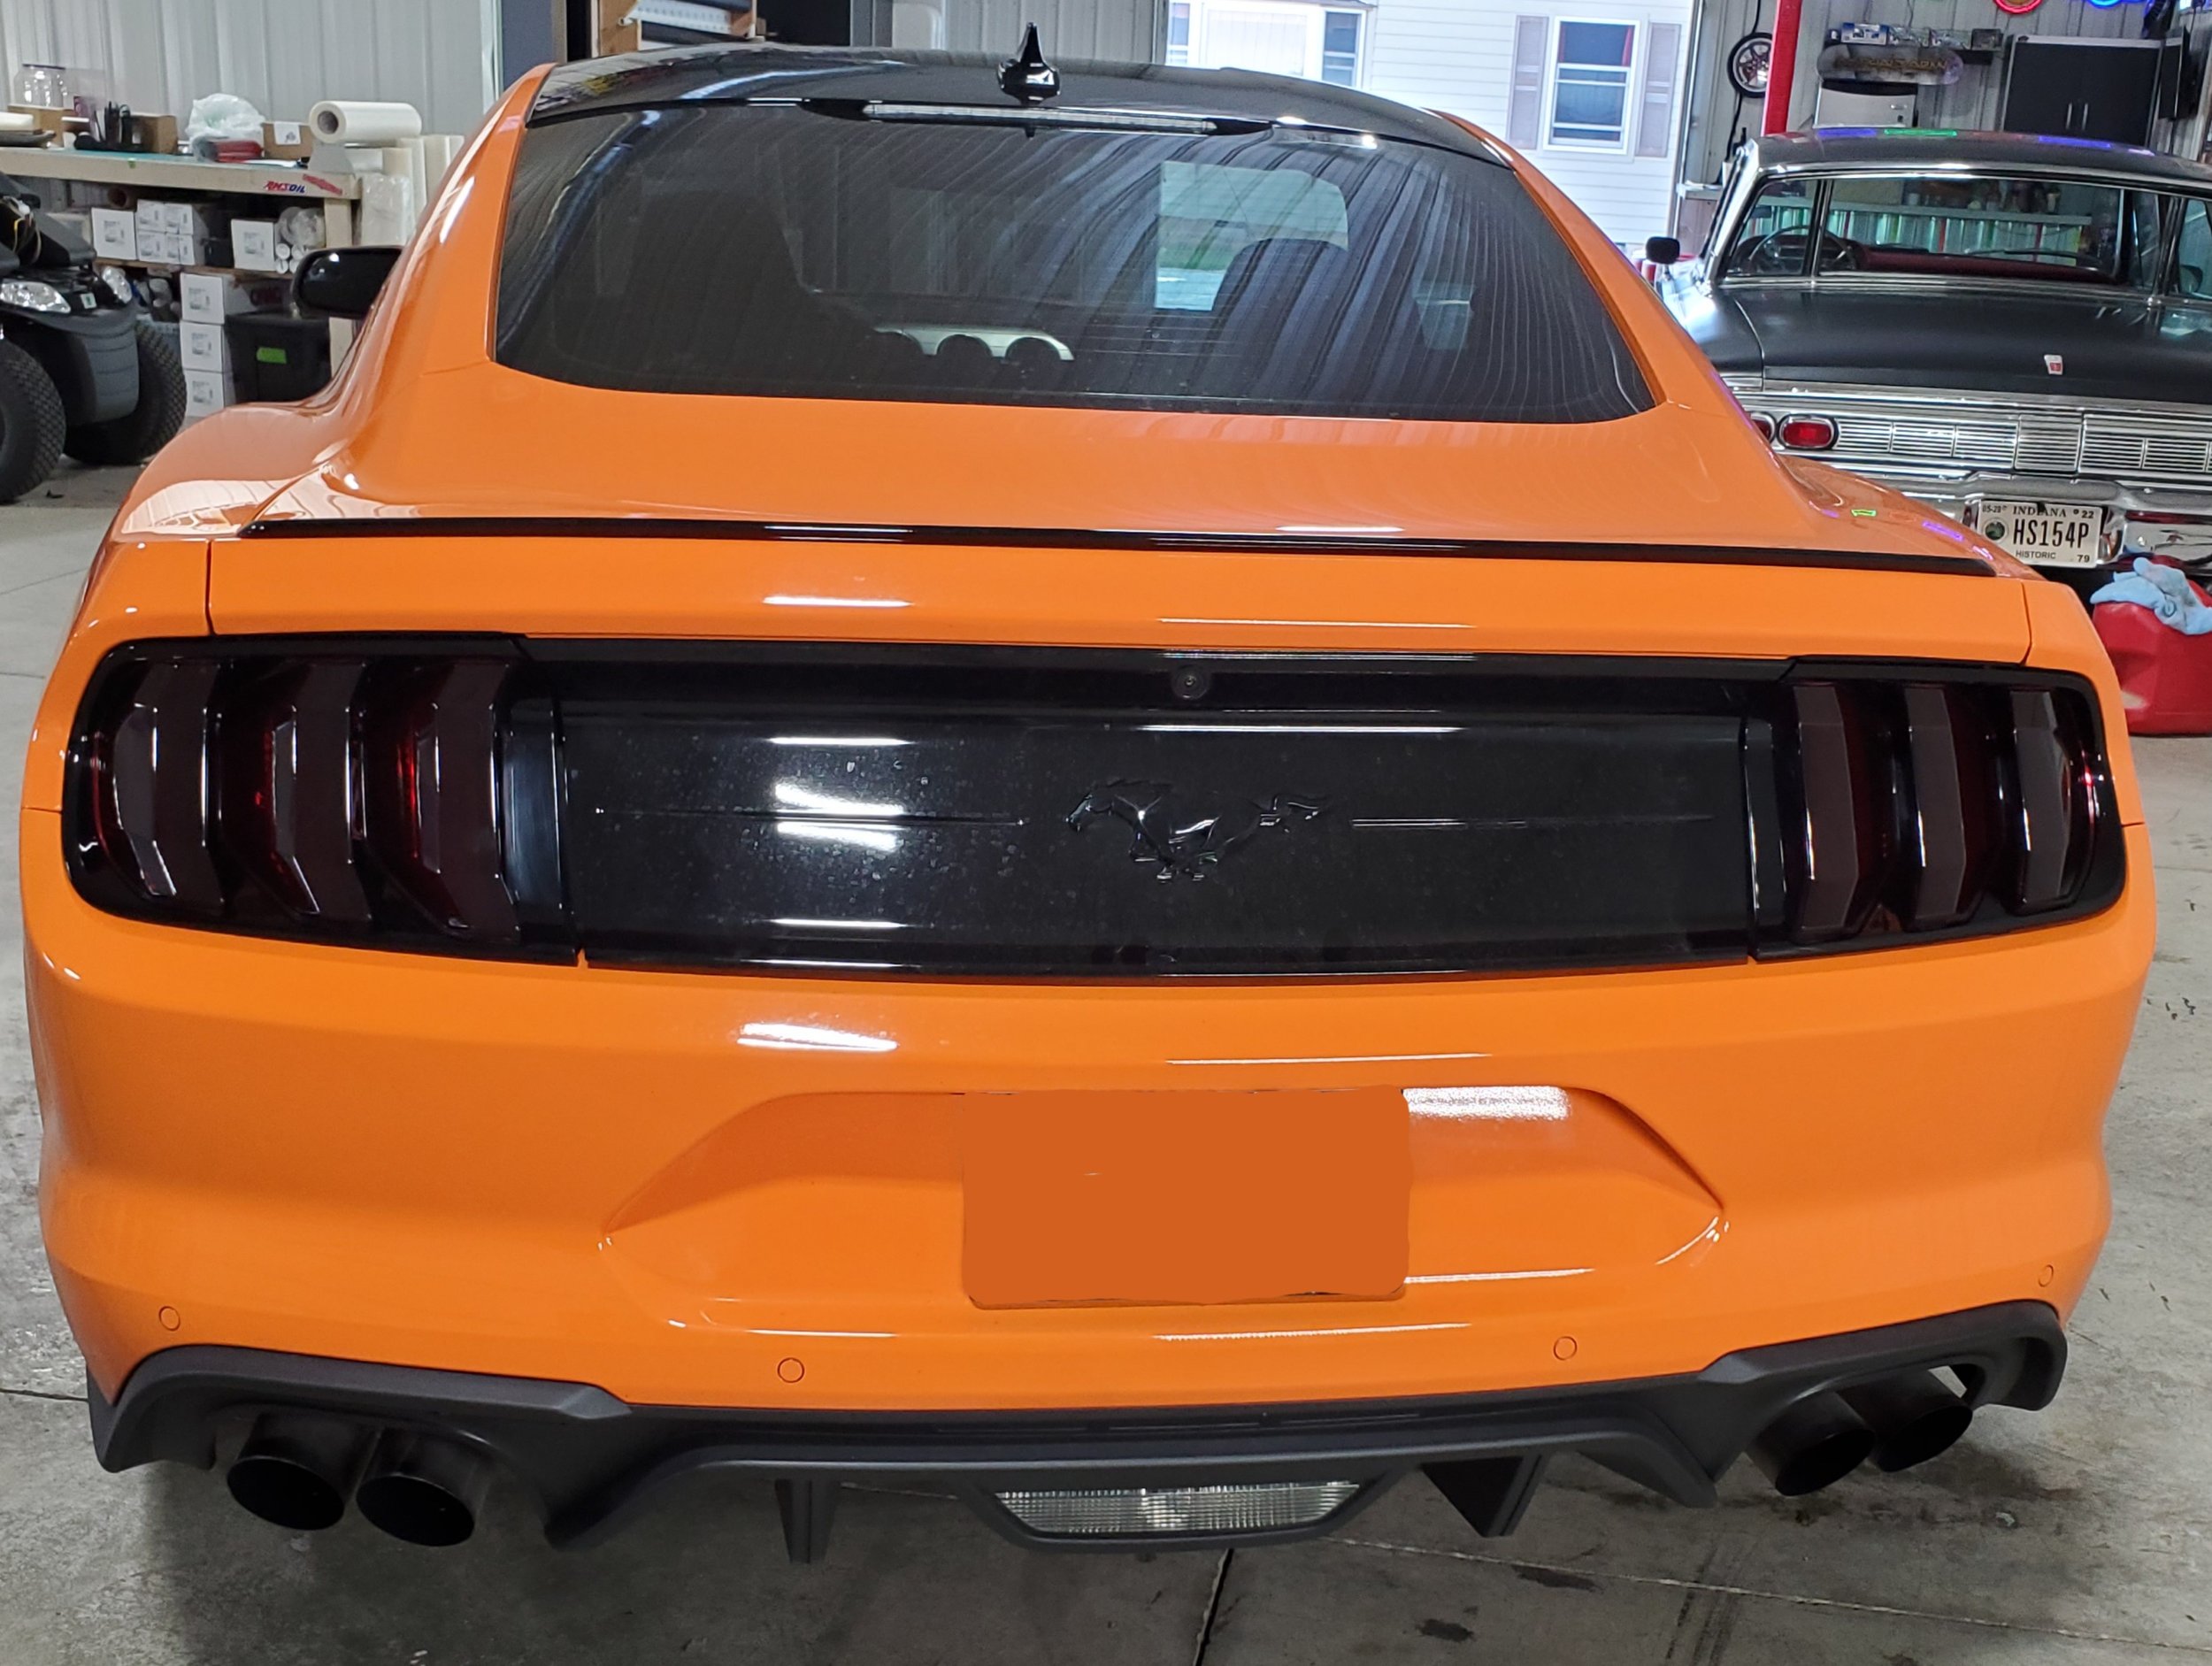  2020 FORD MUSTANG LUXE DARK GLOSS TAIL LIGHTS 